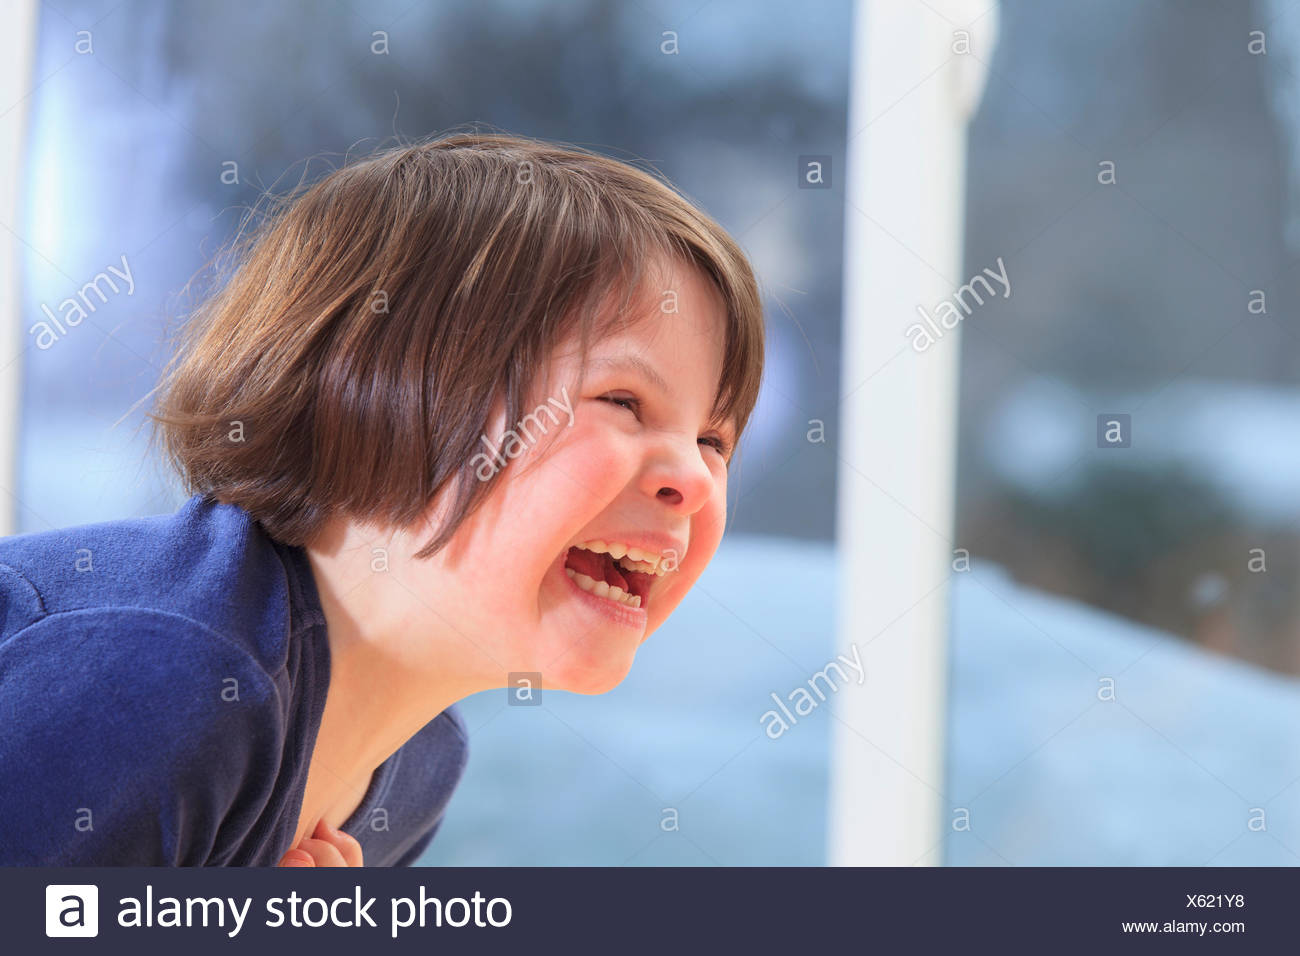 Down Syndrome Girl Laughing High Resolution Stock Photography And Images Alamy